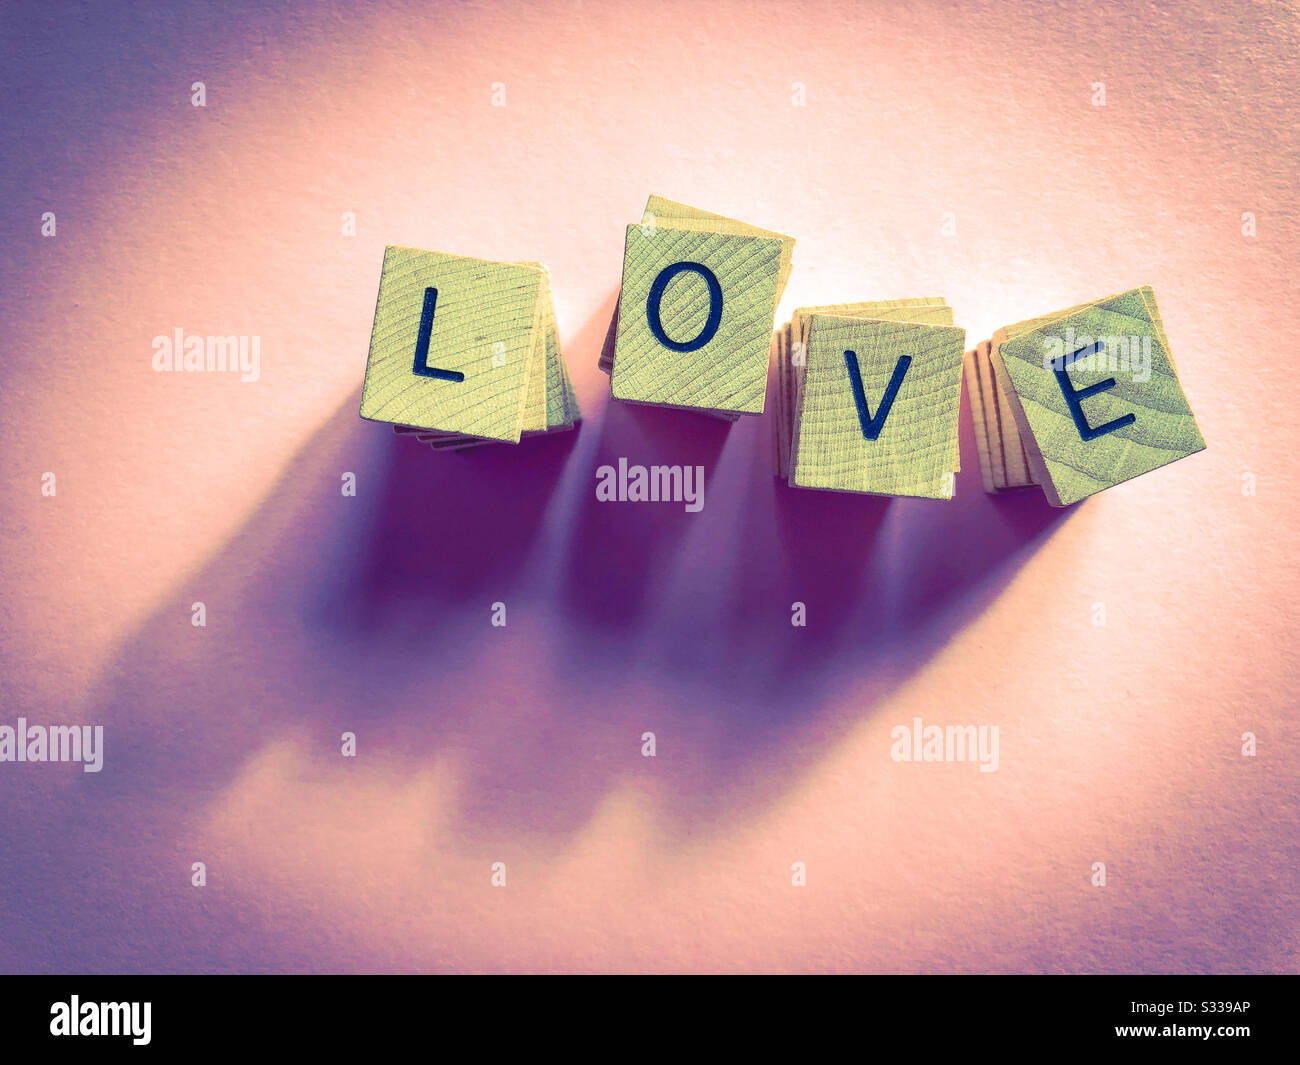 Love, in alphabet letters piled high, with copy space Stock Photo